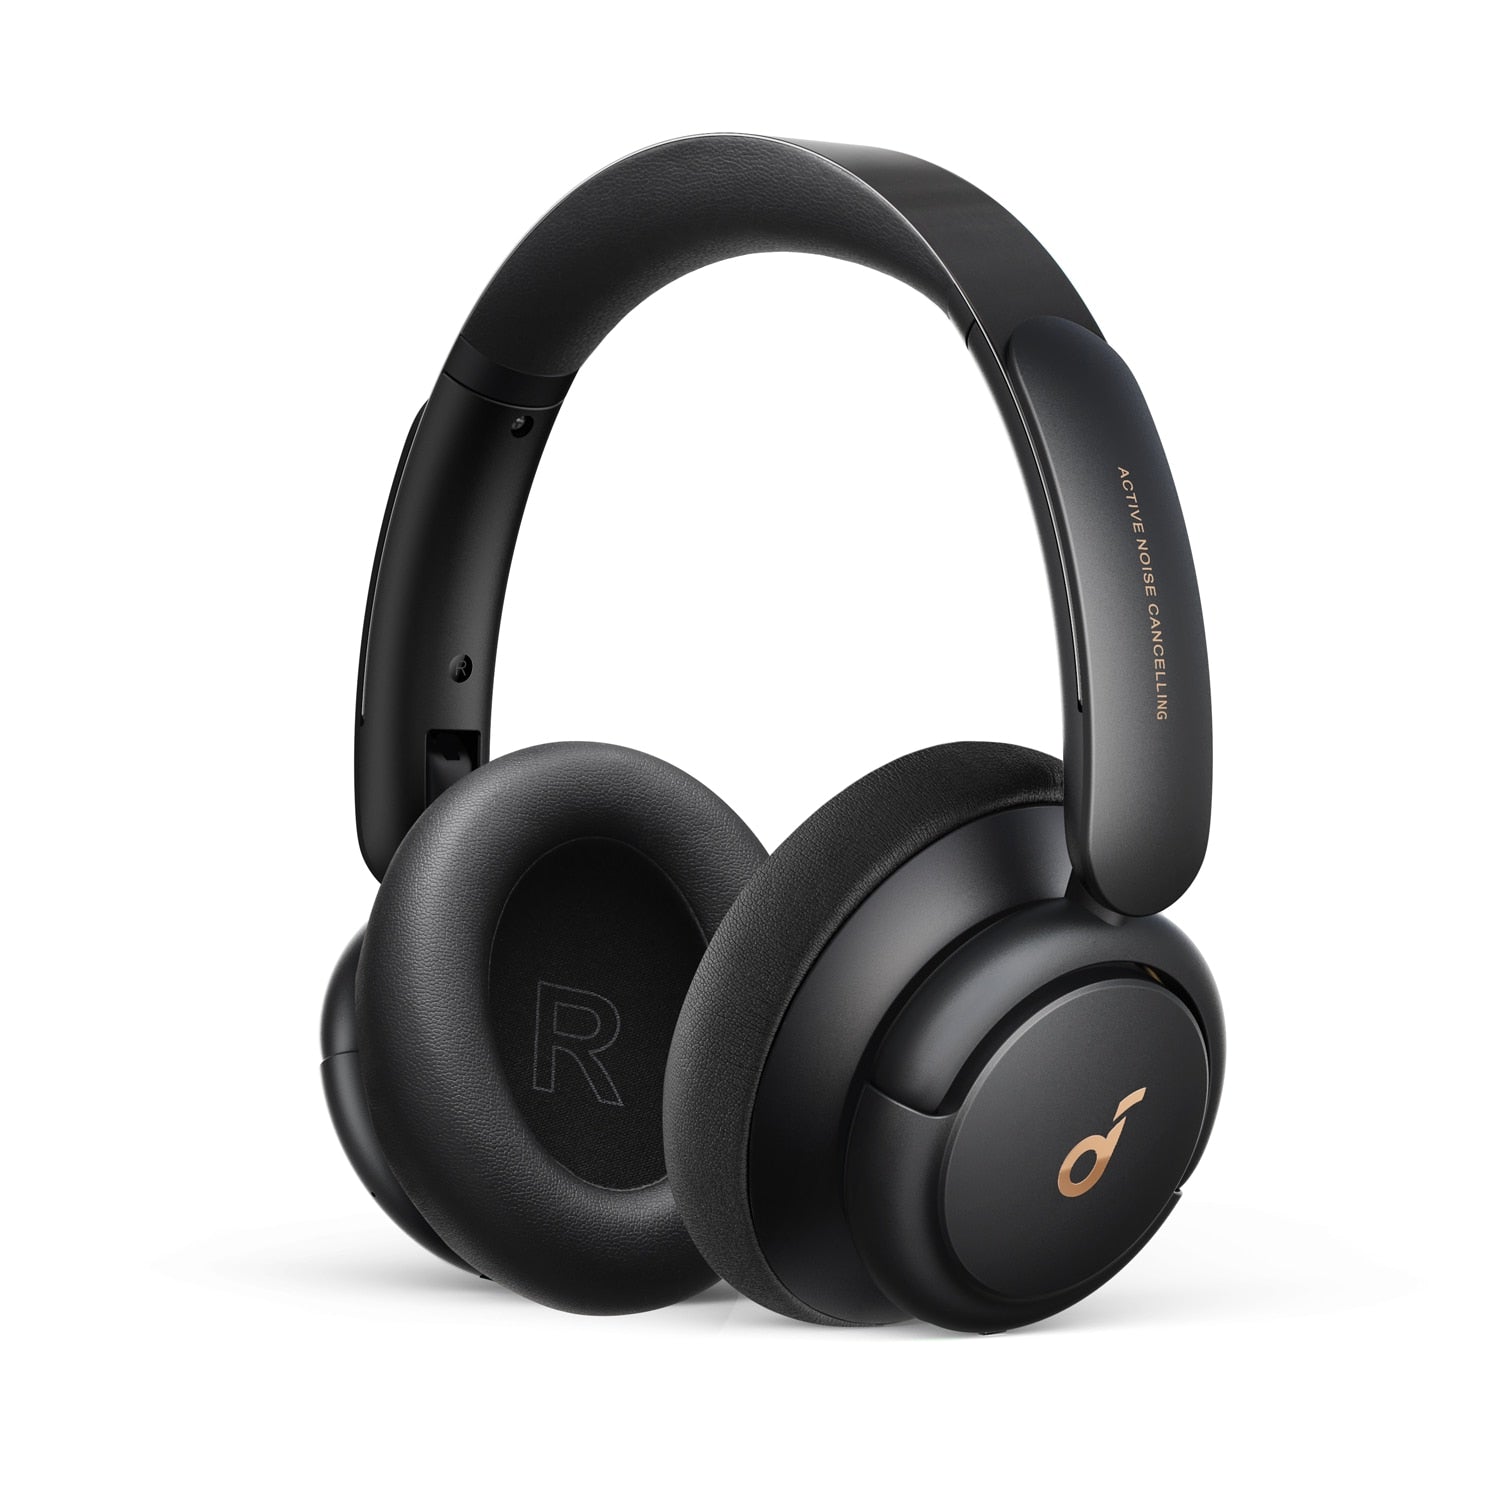 Hybrid Noise-Cancelling and Detection Headphones